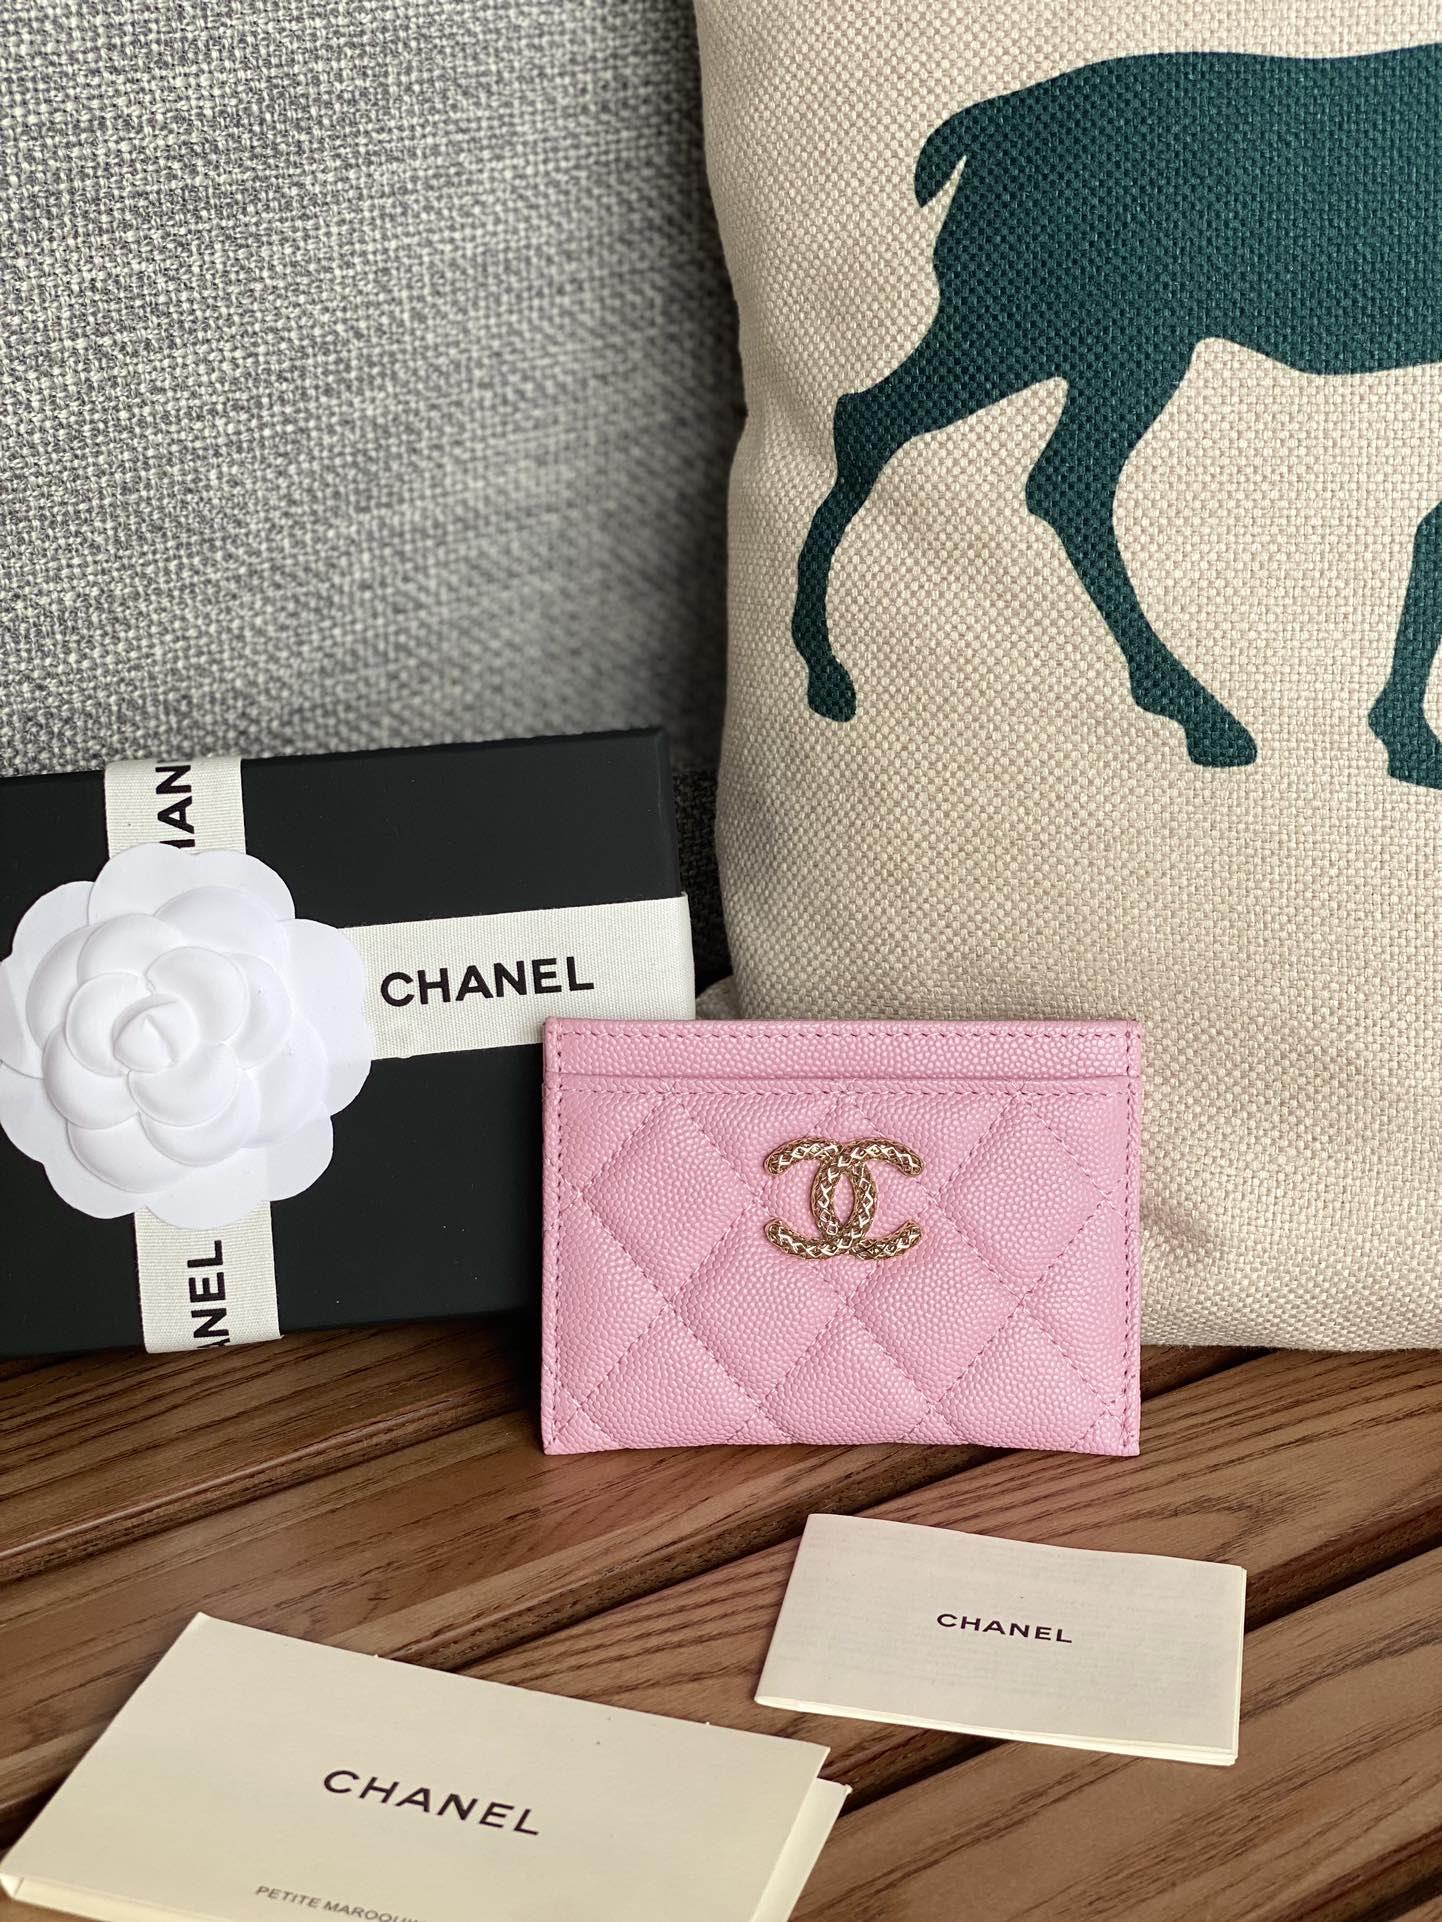 Chanel Wallet Card pack Black Green Pink White Fashion